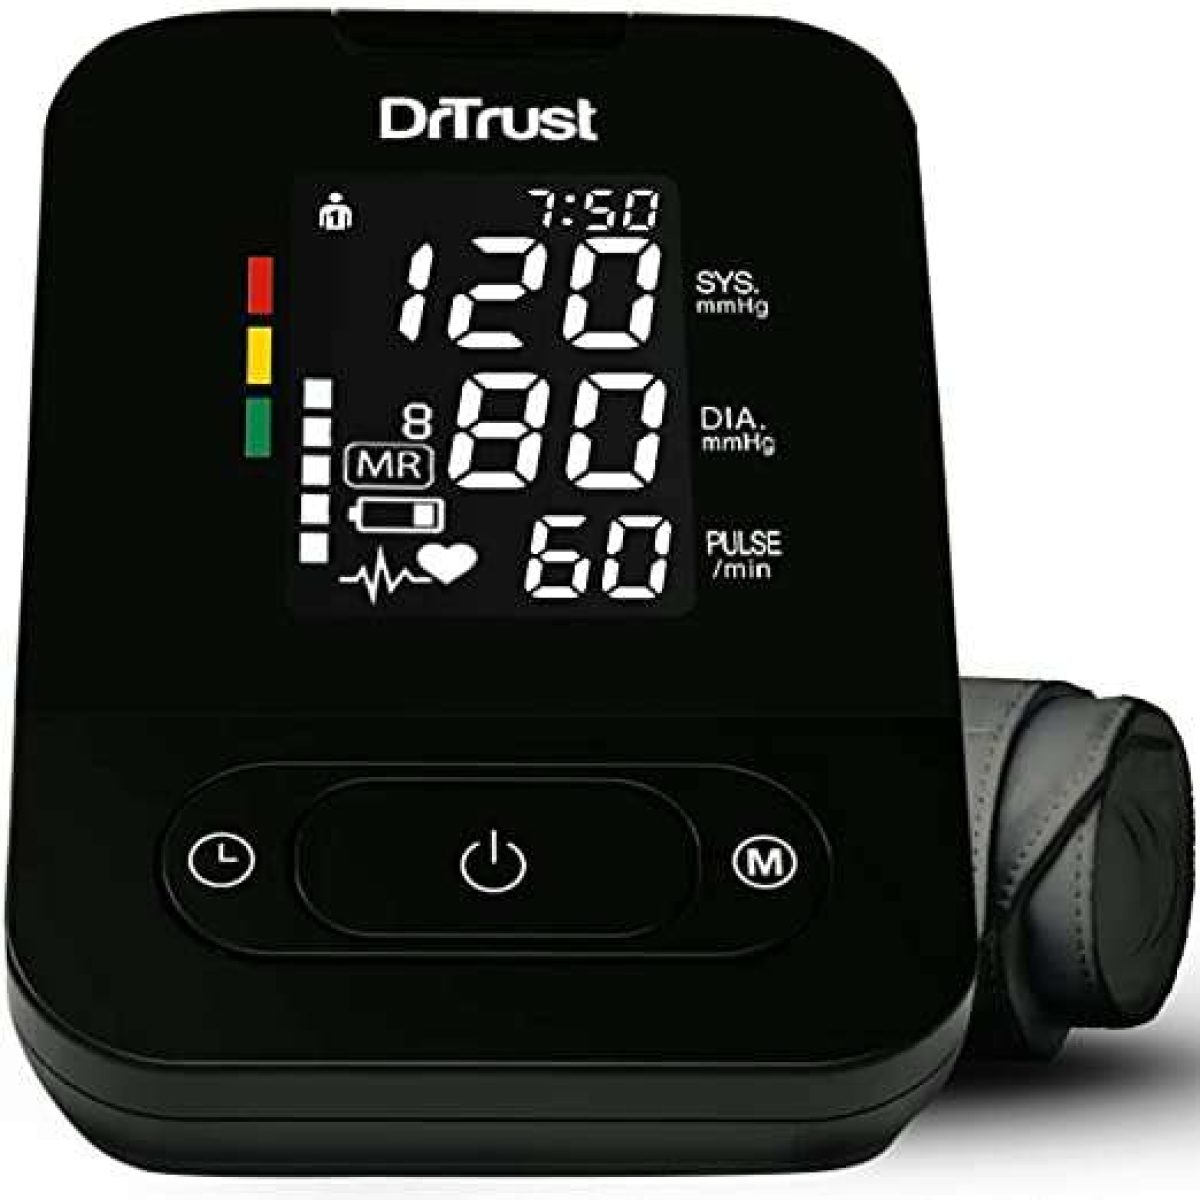 Dr. Trust (USA) Fully Automatic A-One Rechargeable Digital Blood Pressure  Monitor Machine (Micro USB Compatible & Digital Thermometer Included) Bp  Monitor - Dr. Trust 